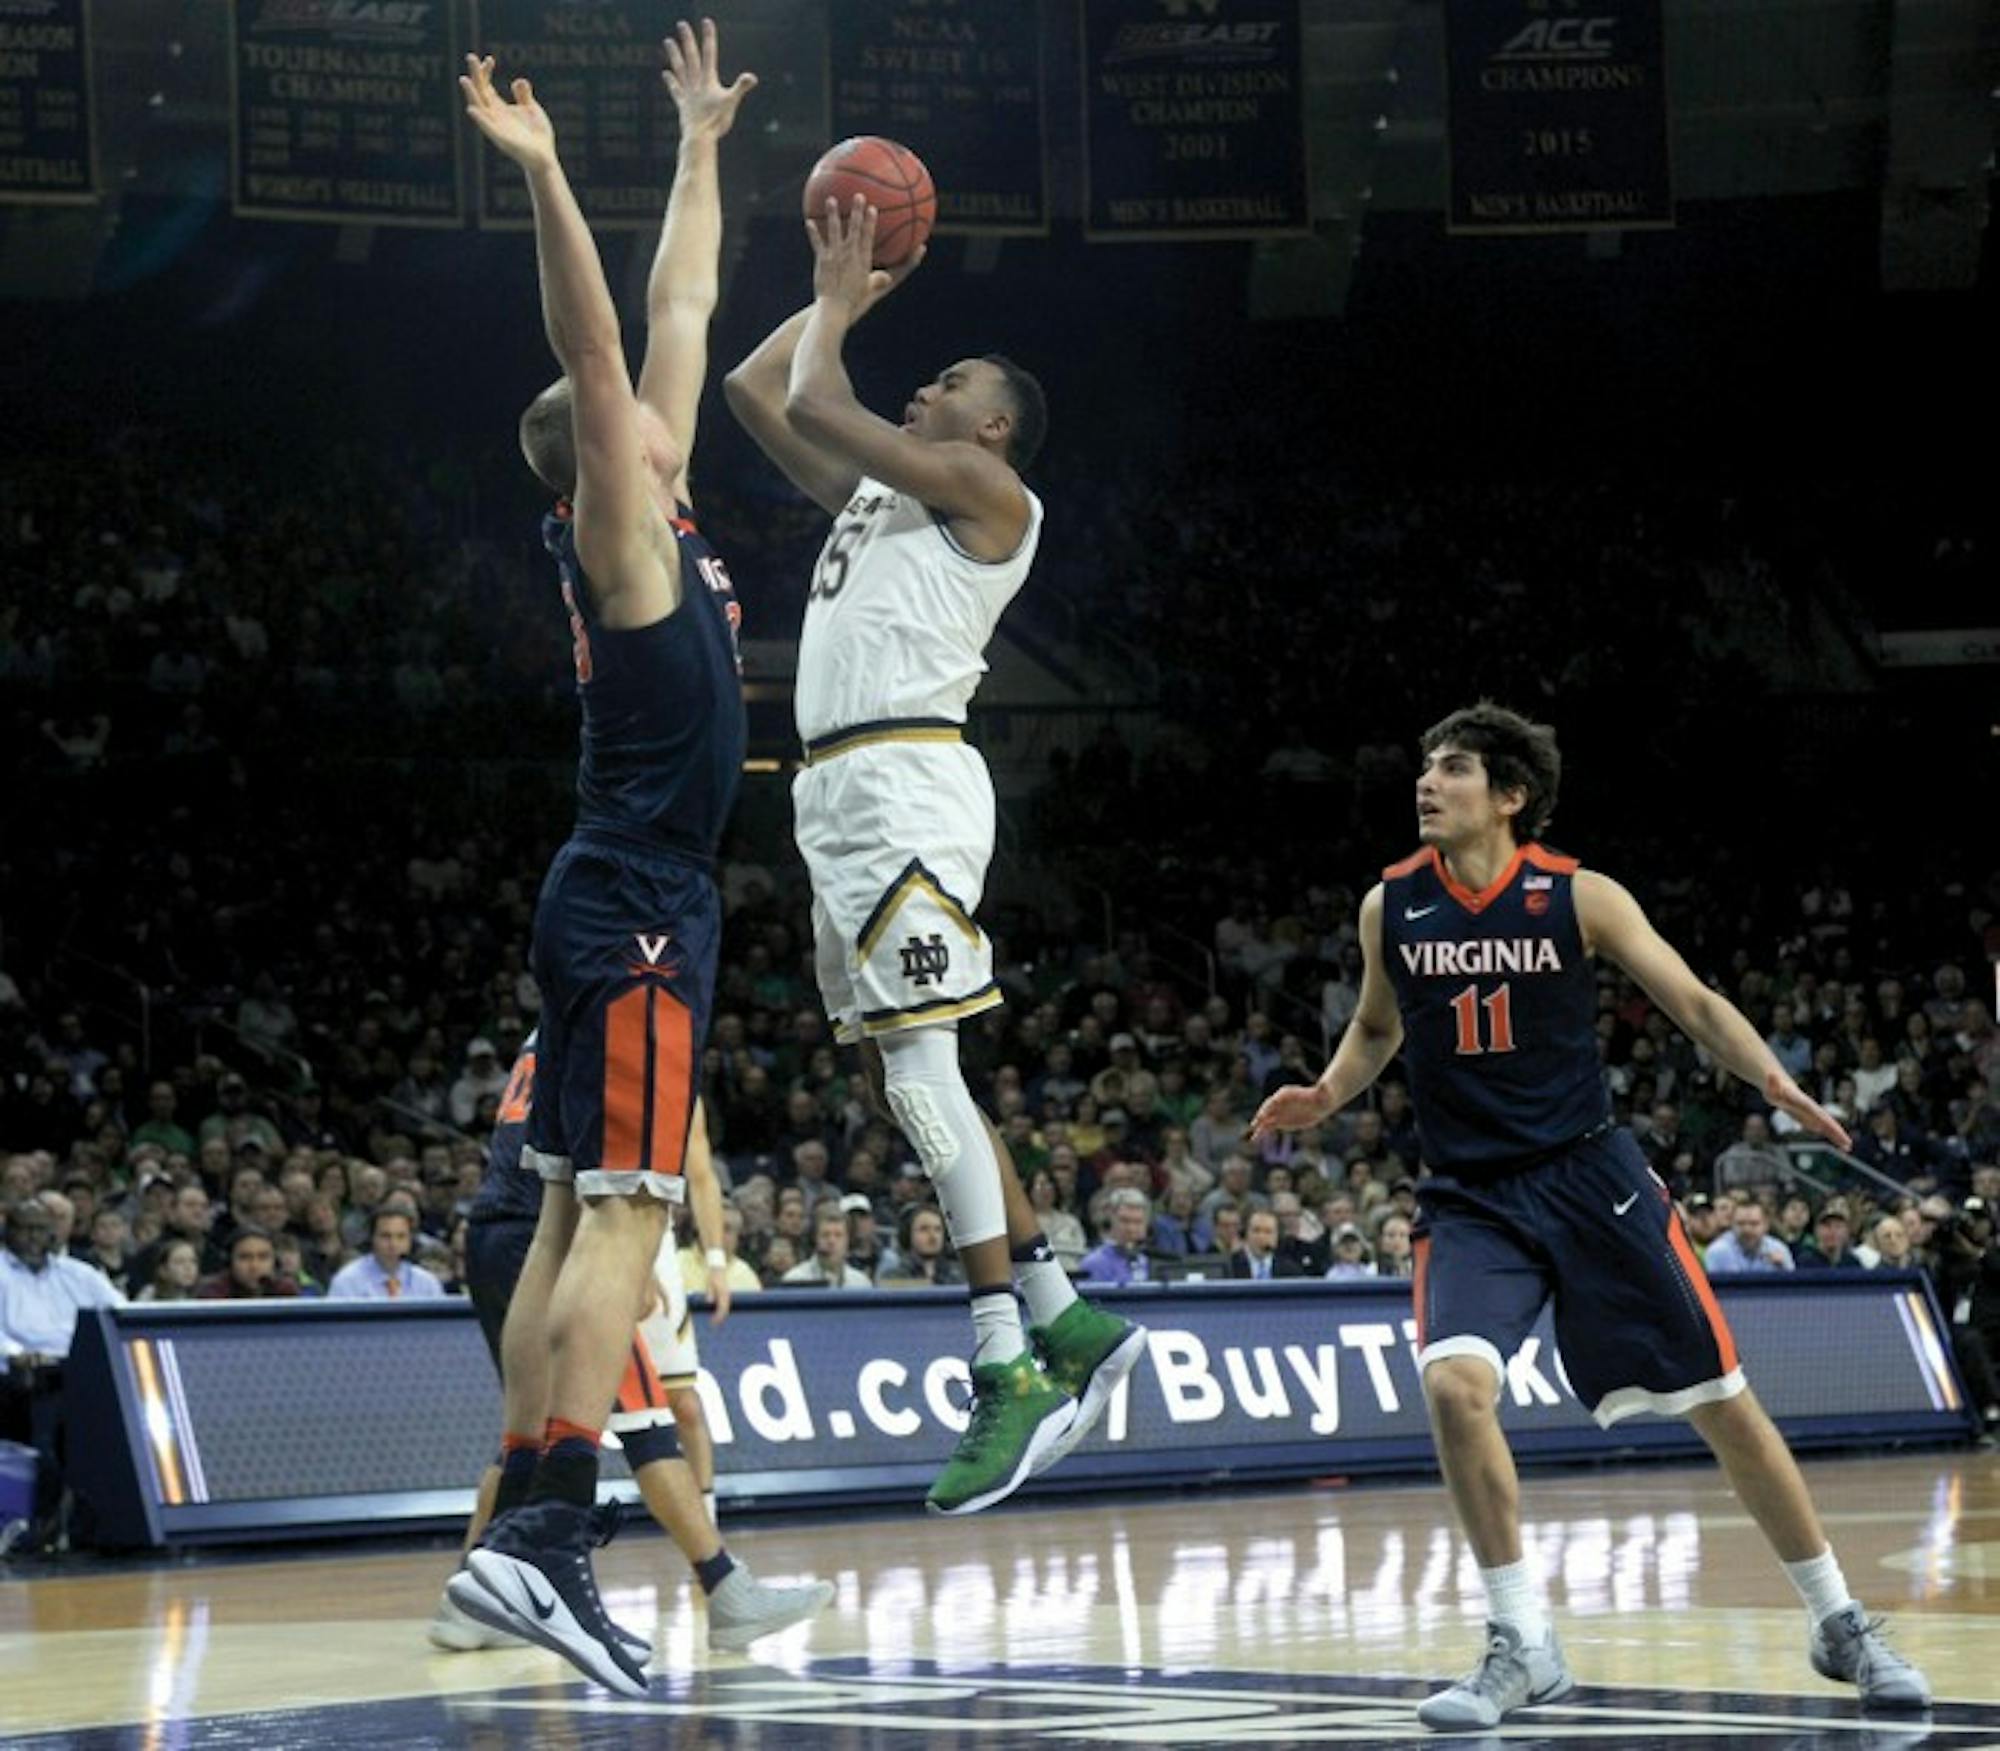 Irish junior forward Bonzie Colson shoots a jumper in Notre Dame’s 71-54 loss to Virginia on Tuesday at Purcell Pavilion.